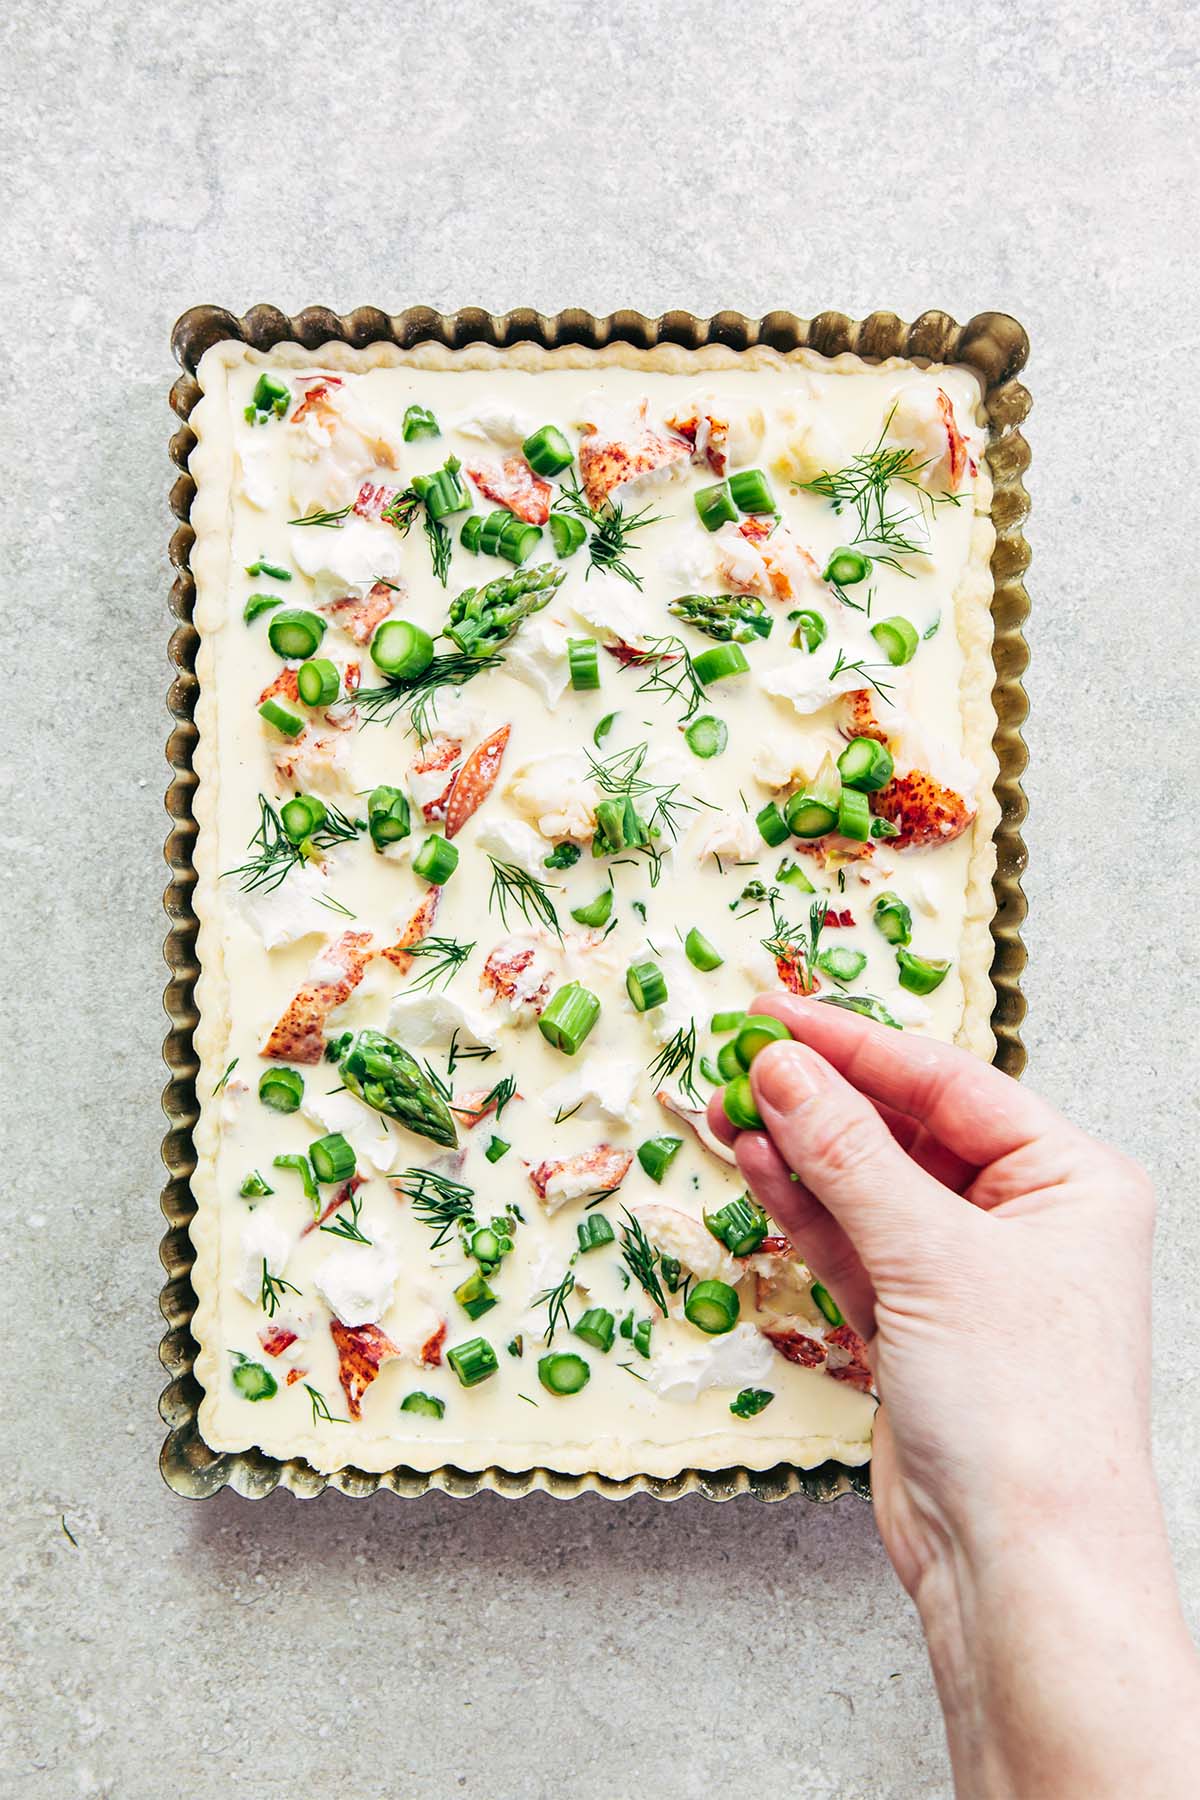 A woman's hand sprinkling sliced asparagus over an unbaked lobster quiche in a rectangular metal tart tin on a stone surface.